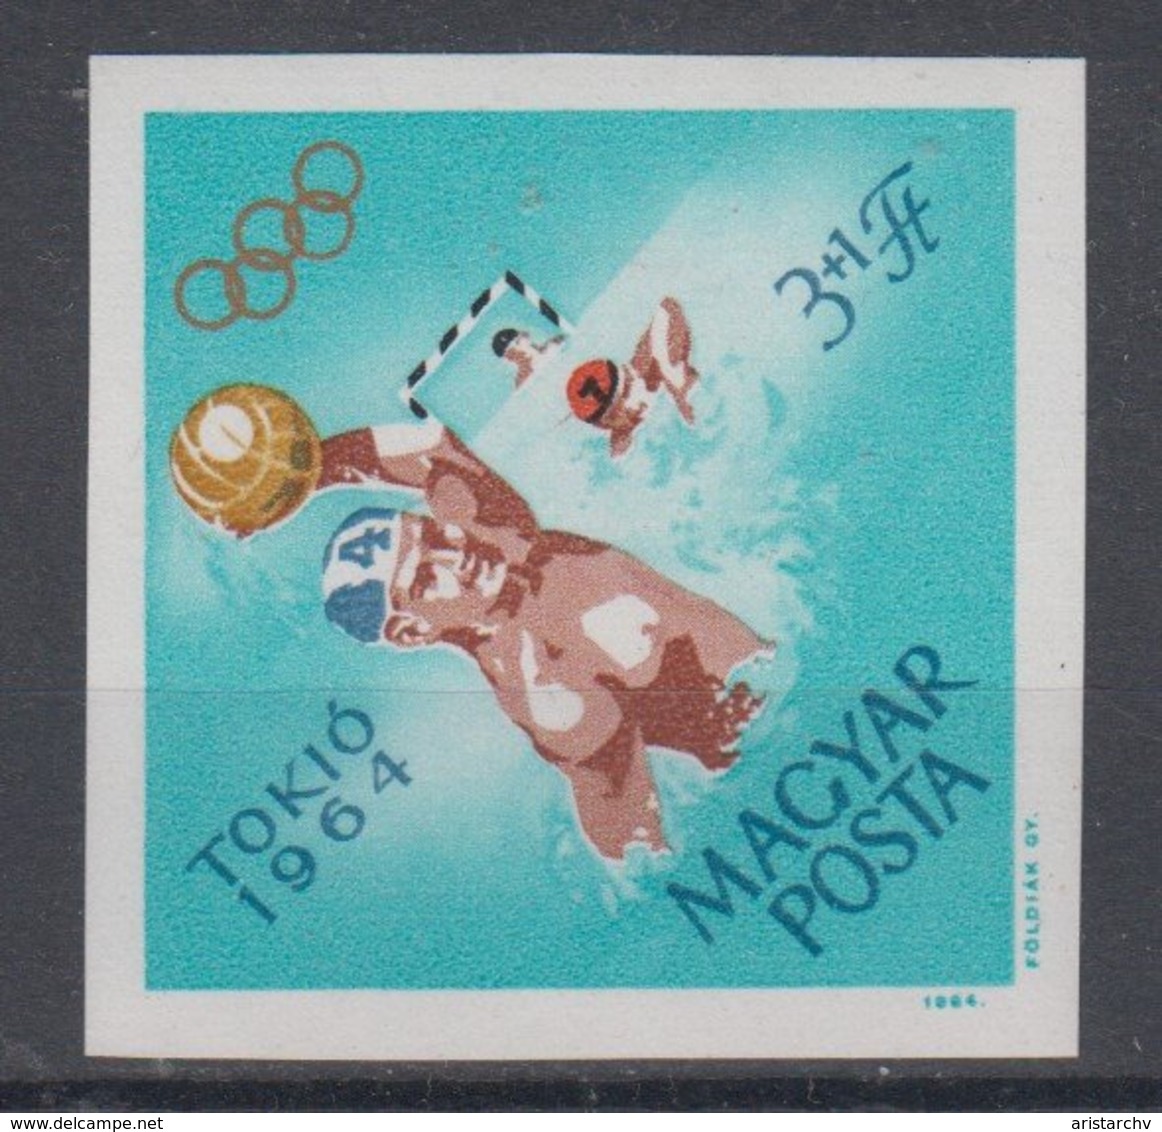 HUNGARY 1964 WATER POLO OLYMPIC GAMES IMPERFORATED - Wasserball